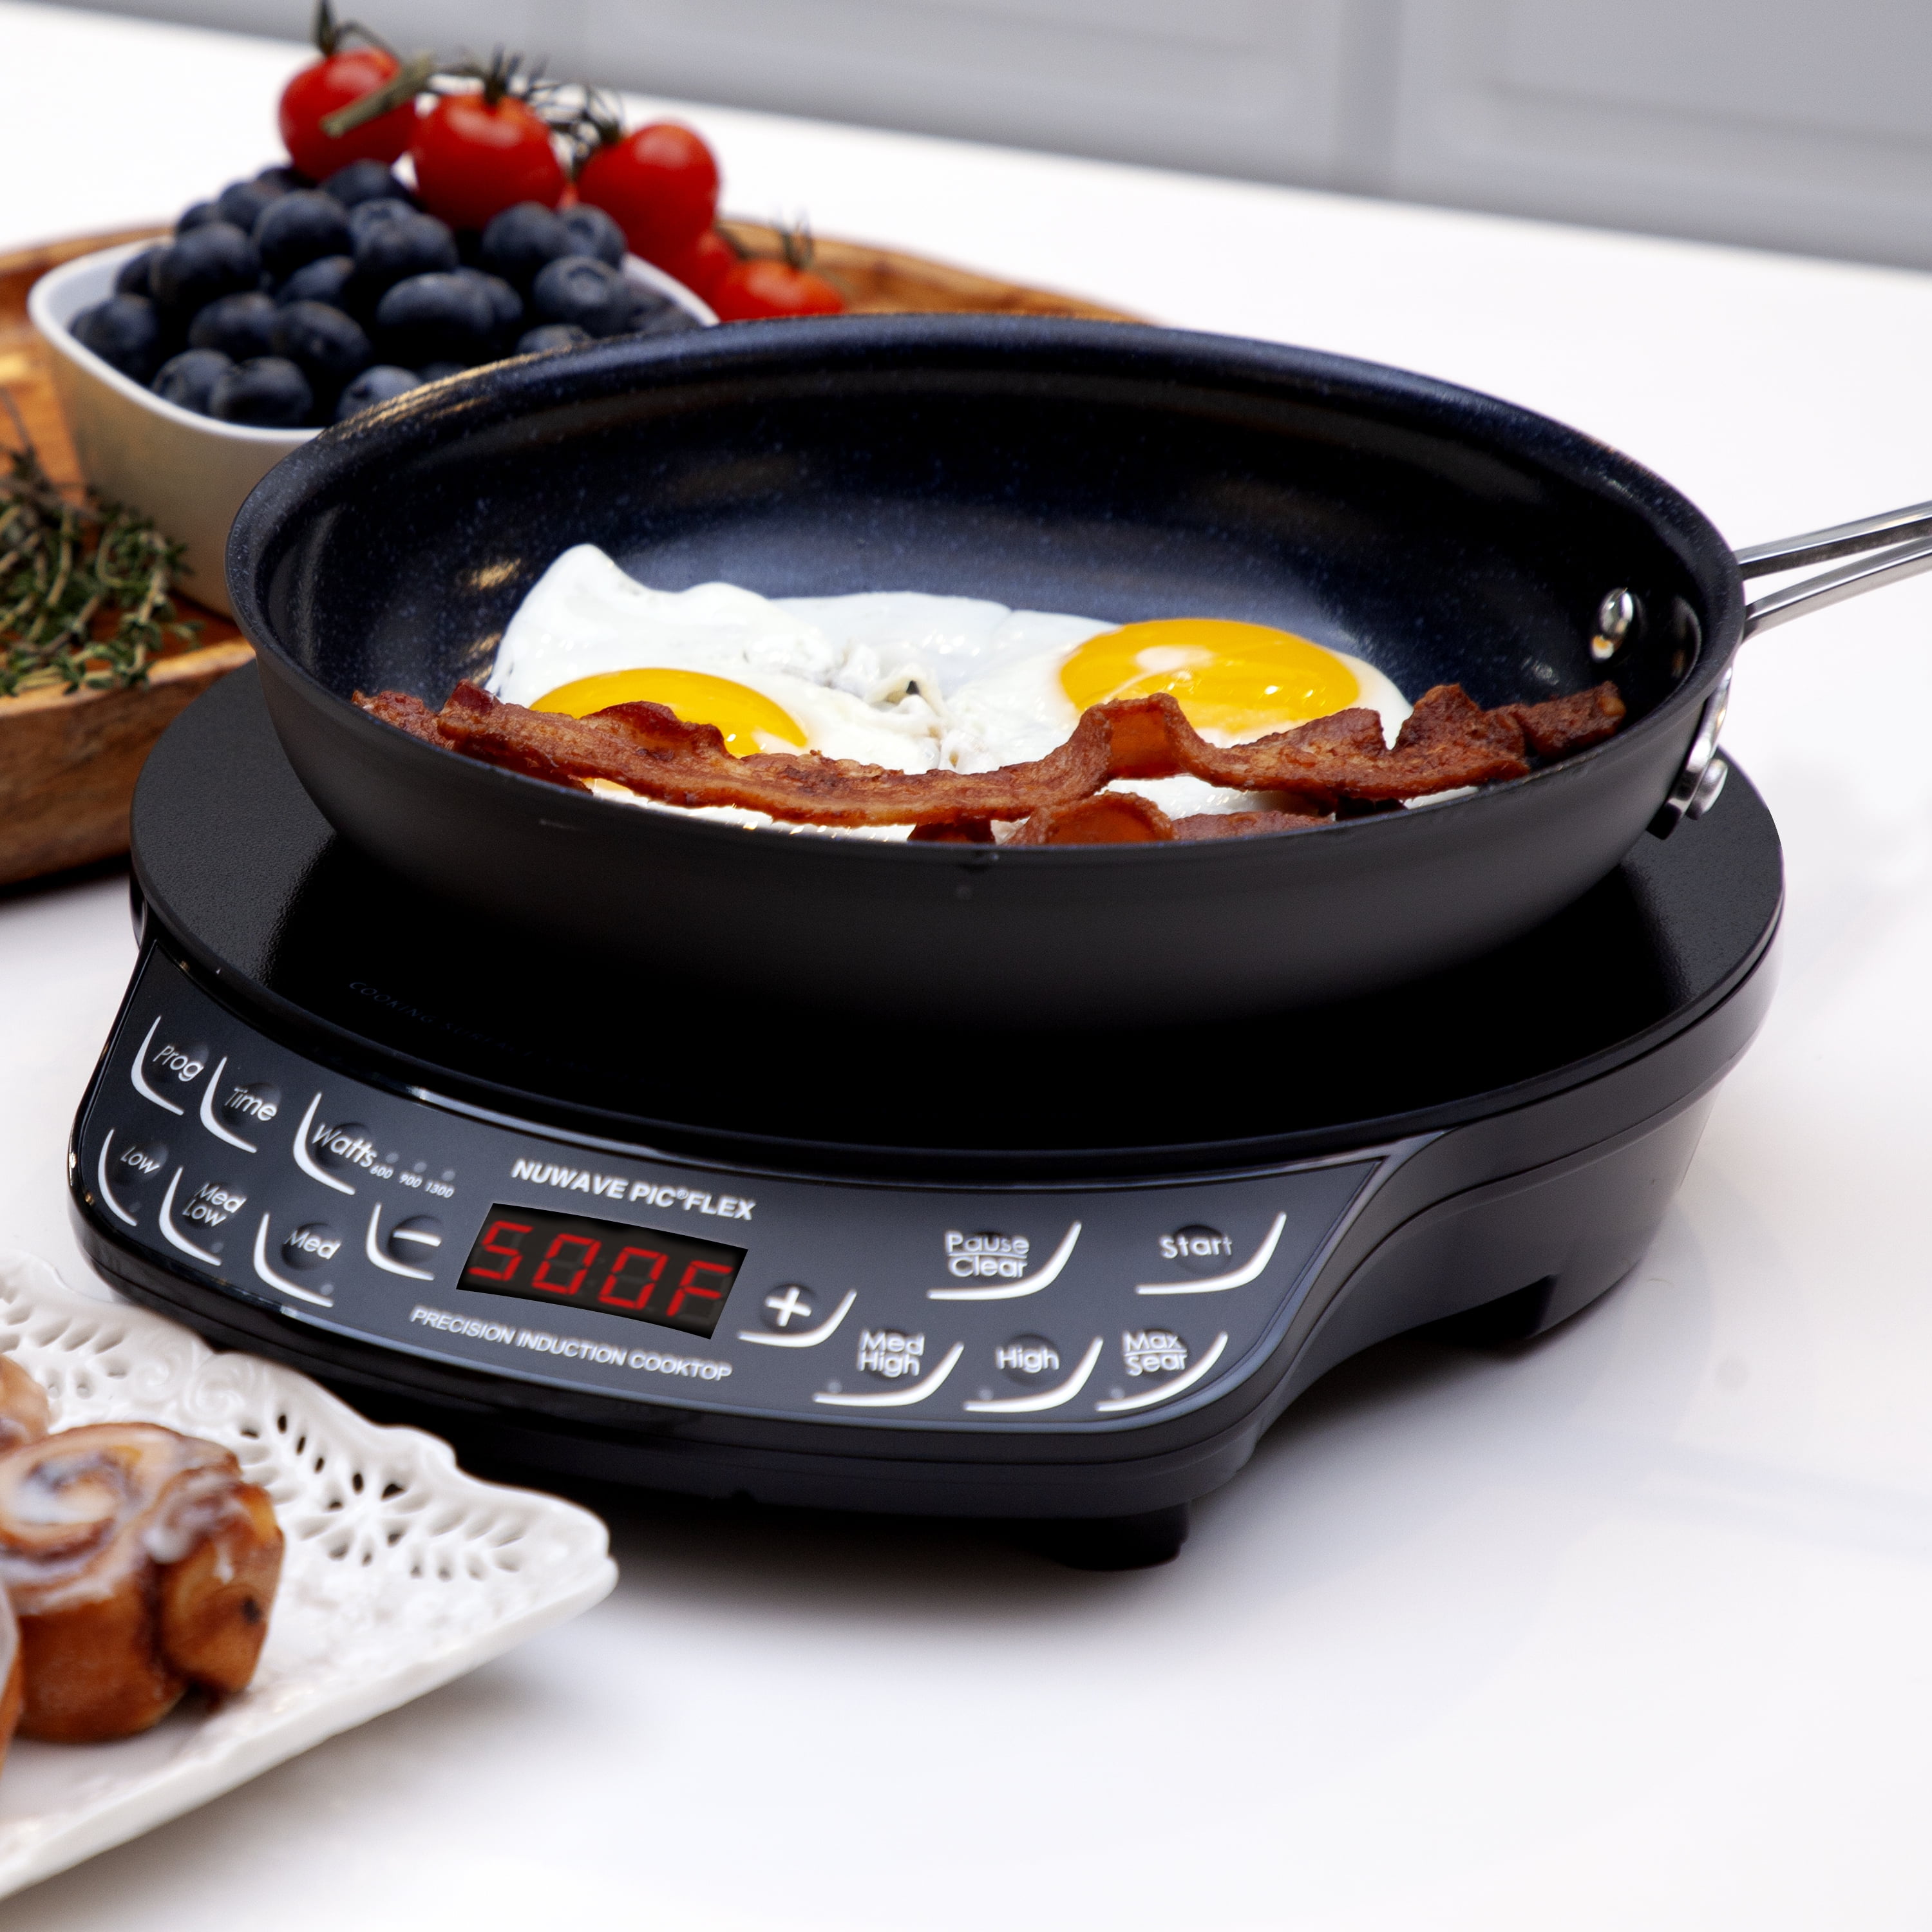 NuWave Portable Induction Cooktop Flex, 10.25-inch Shatter-Proof Ceramic  Glass and Large 6.5-inch Heating Coil, 3 Wattage Settings 600, 900 & 1300